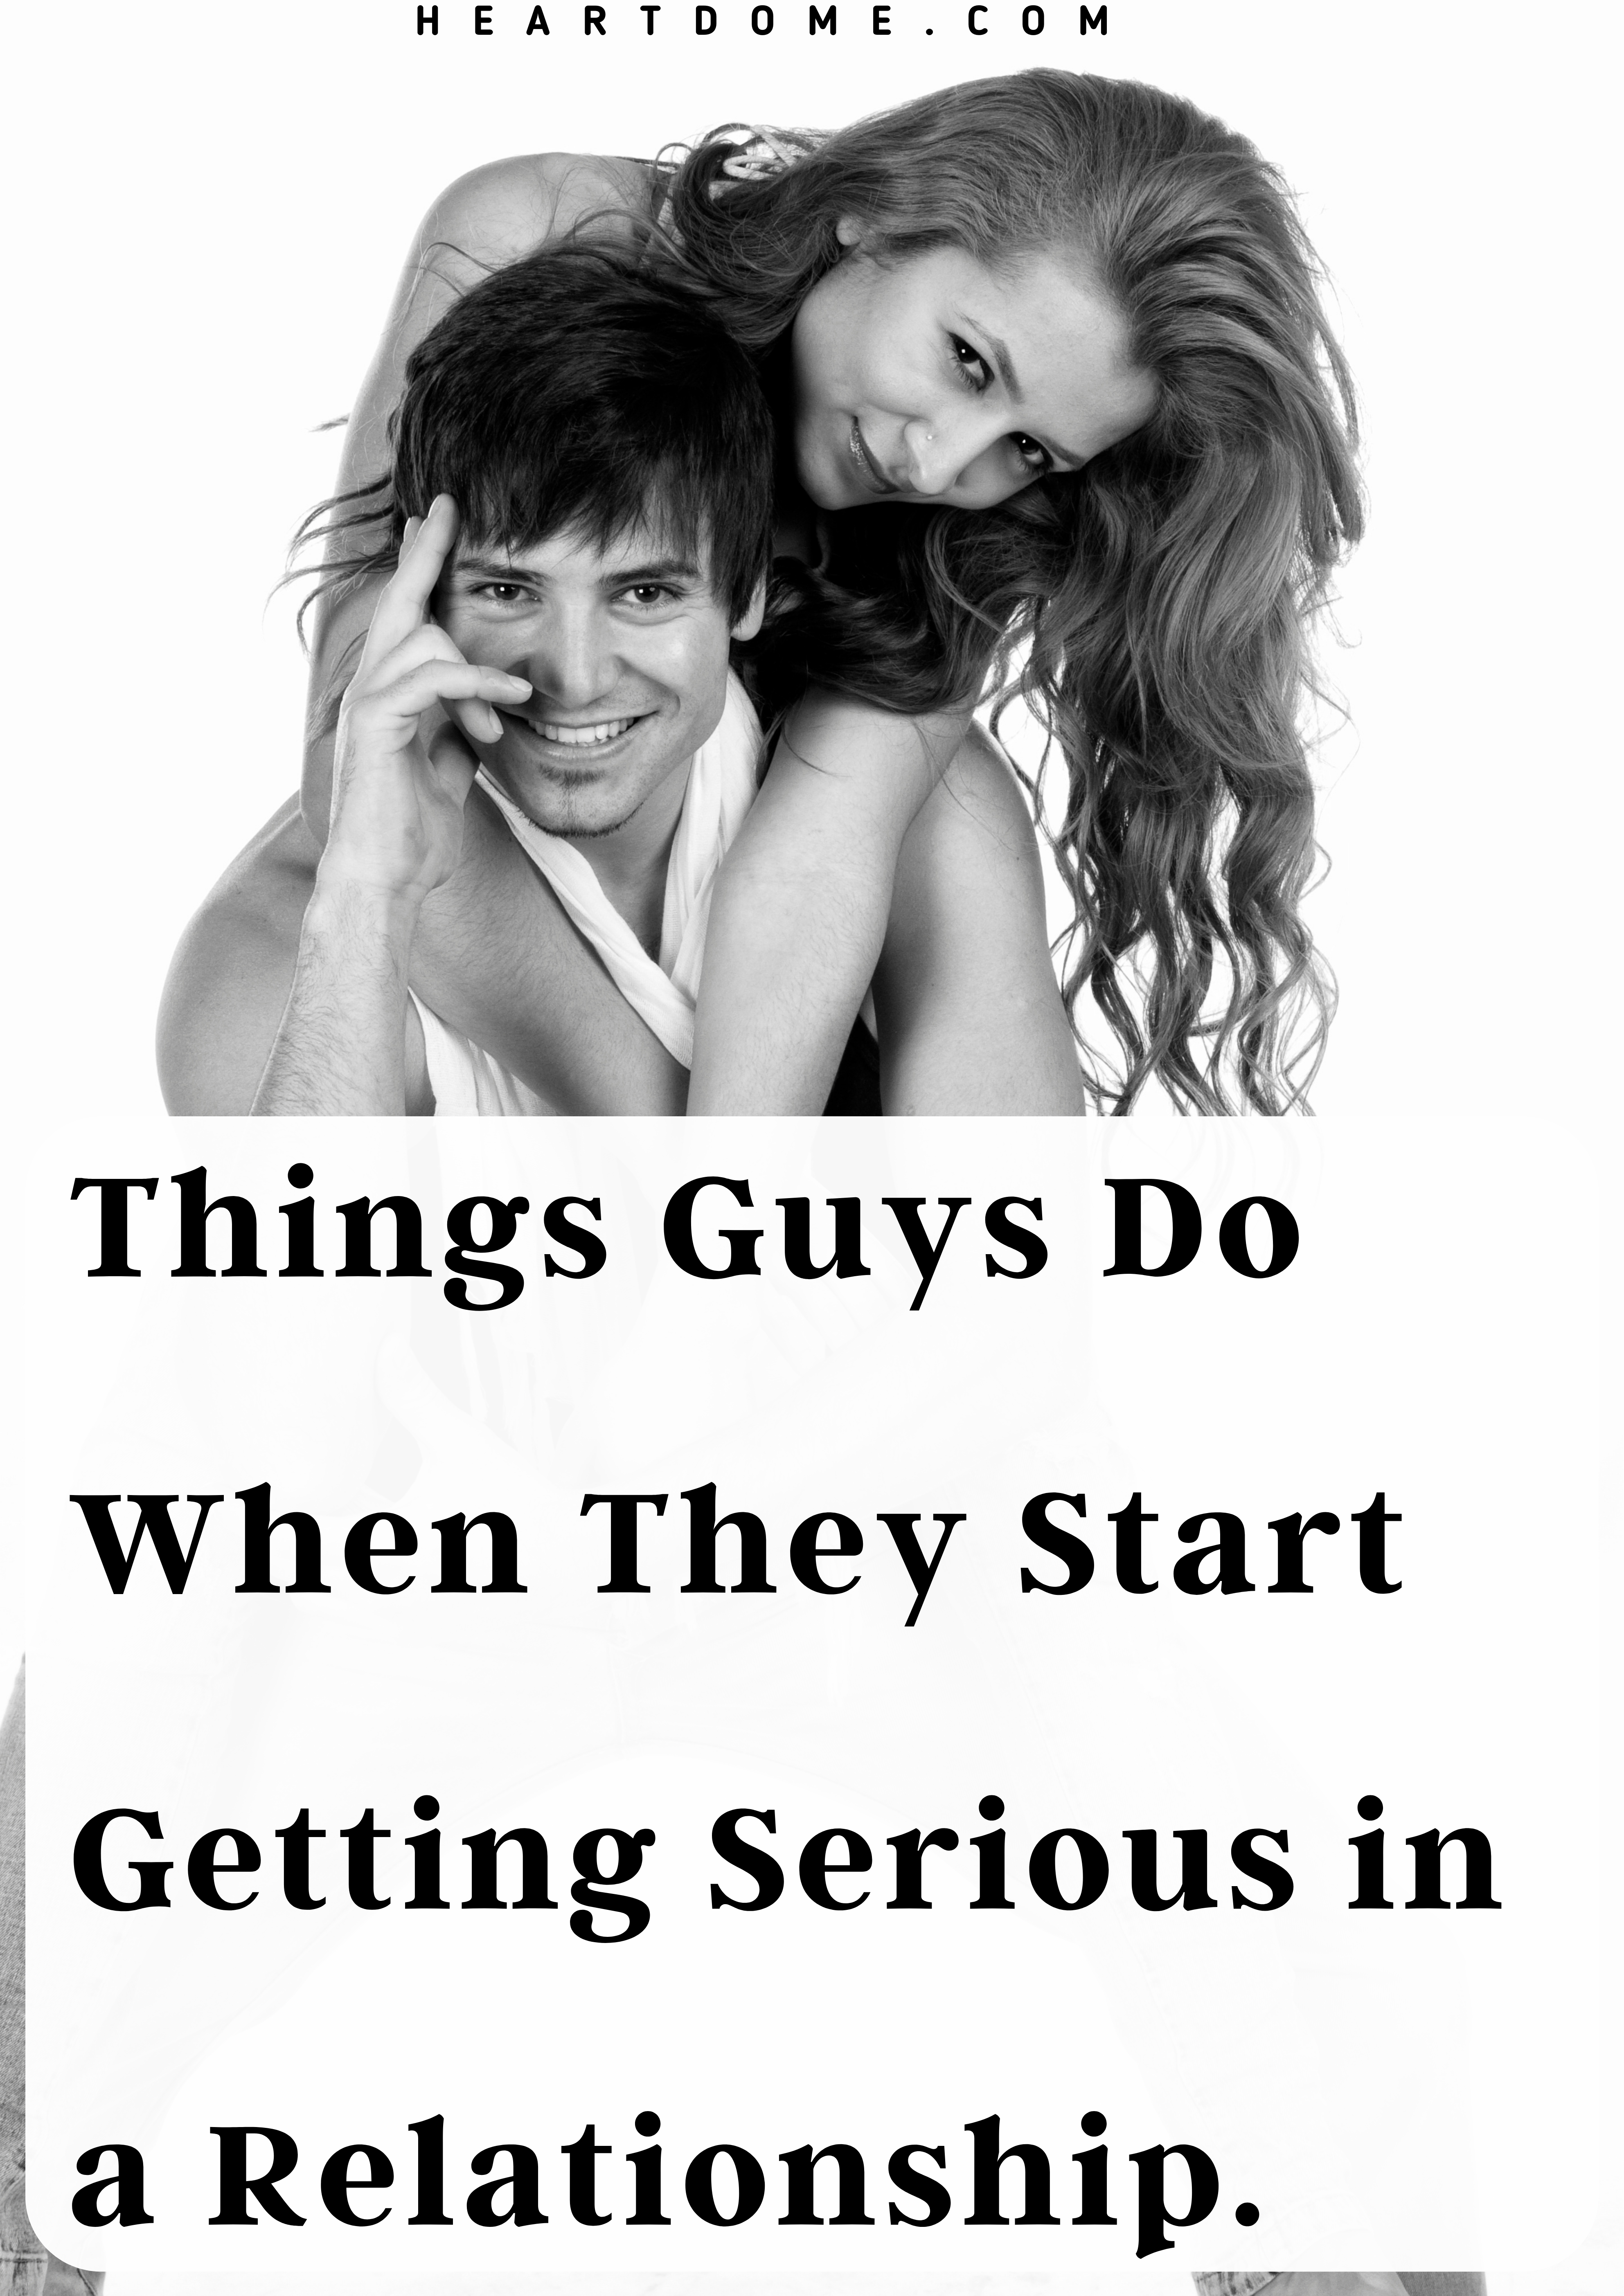 Things Guys Do When They Start Getting Serious in a Relationship